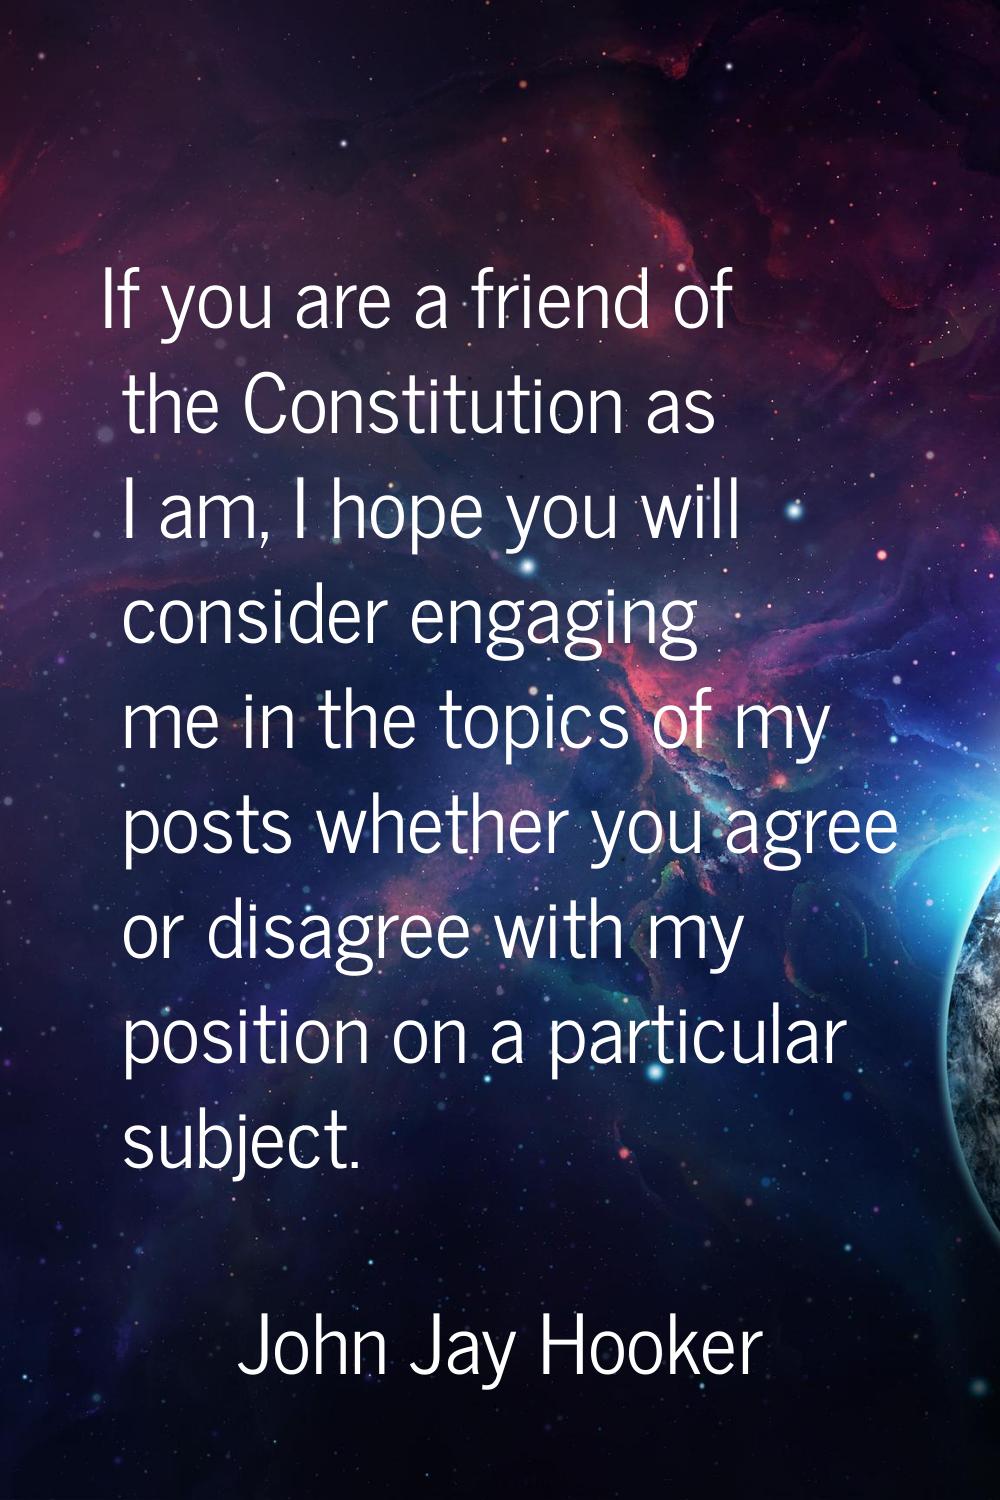 If you are a friend of the Constitution as I am, I hope you will consider engaging me in the topics